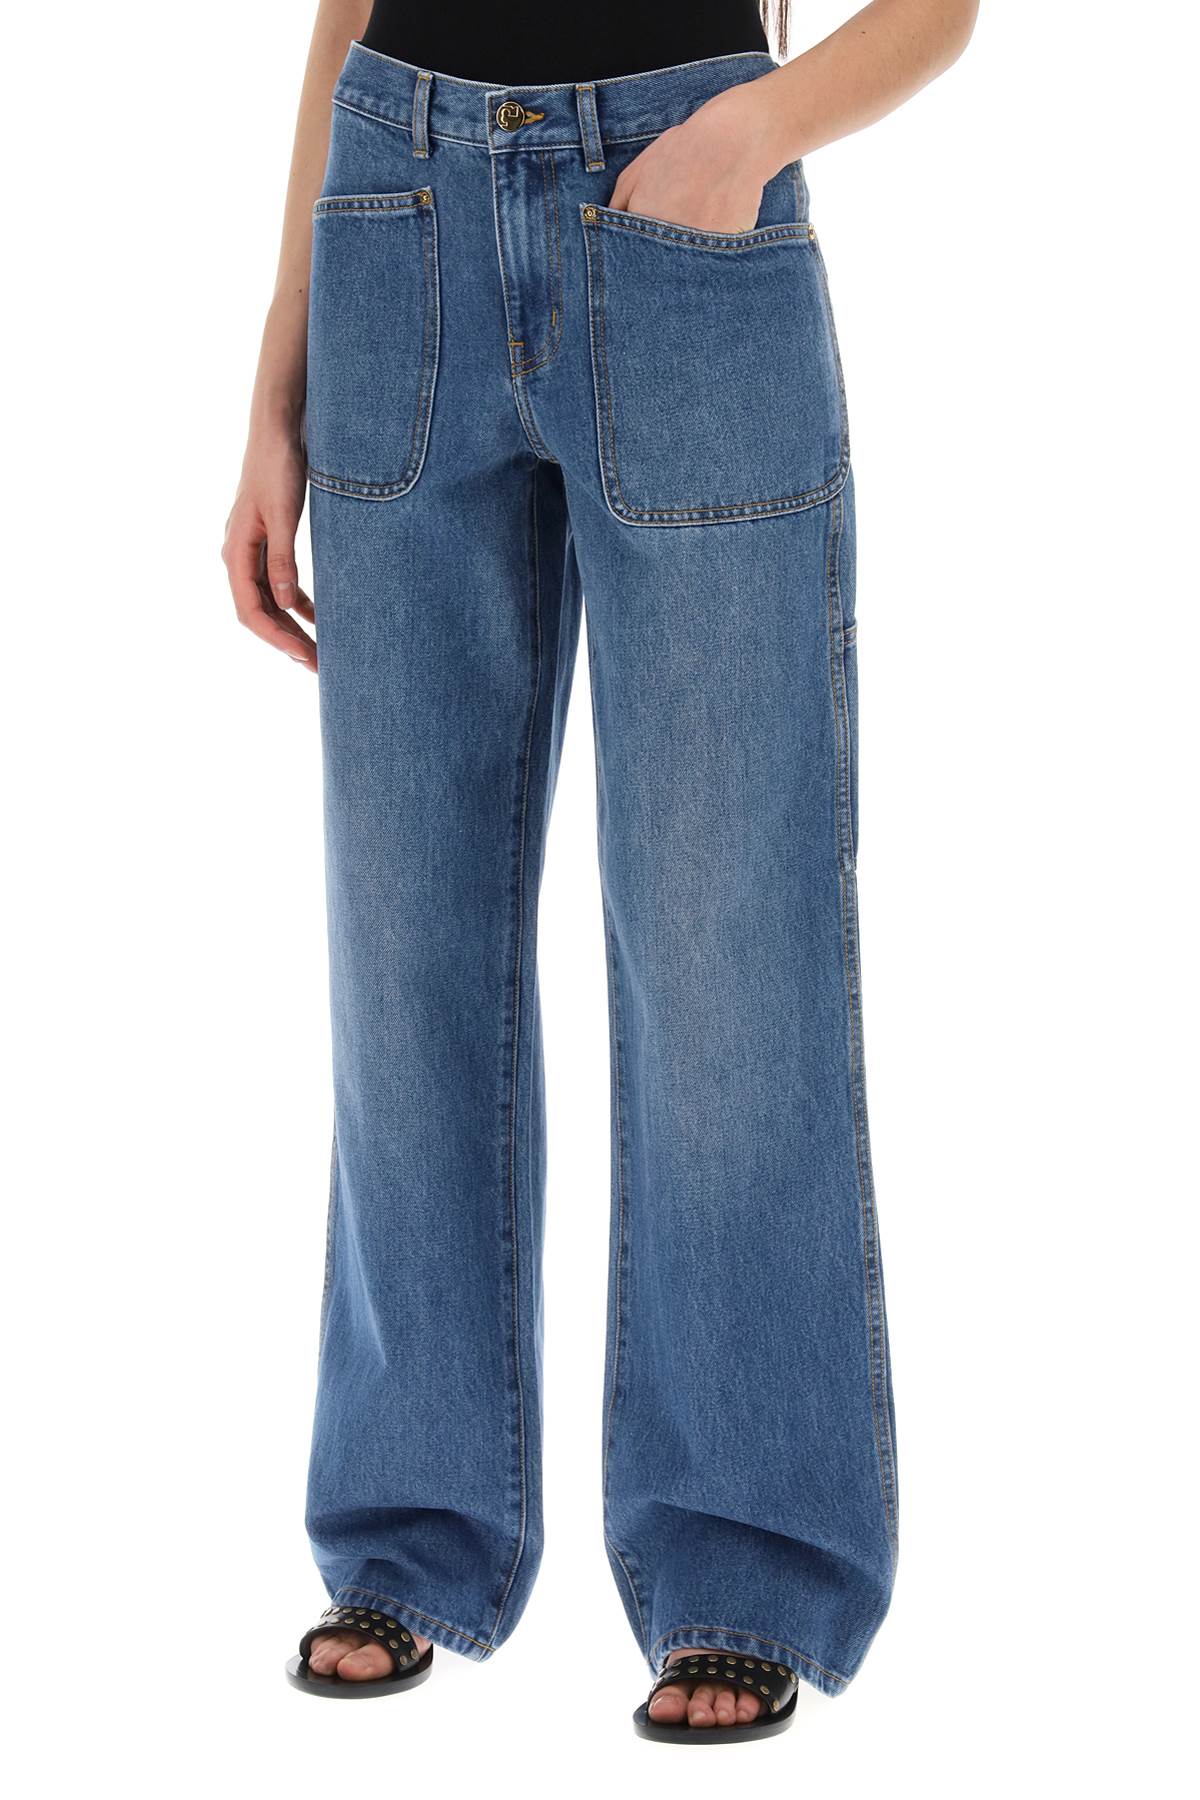 Tory burch high-waisted cargo style jeans in-3